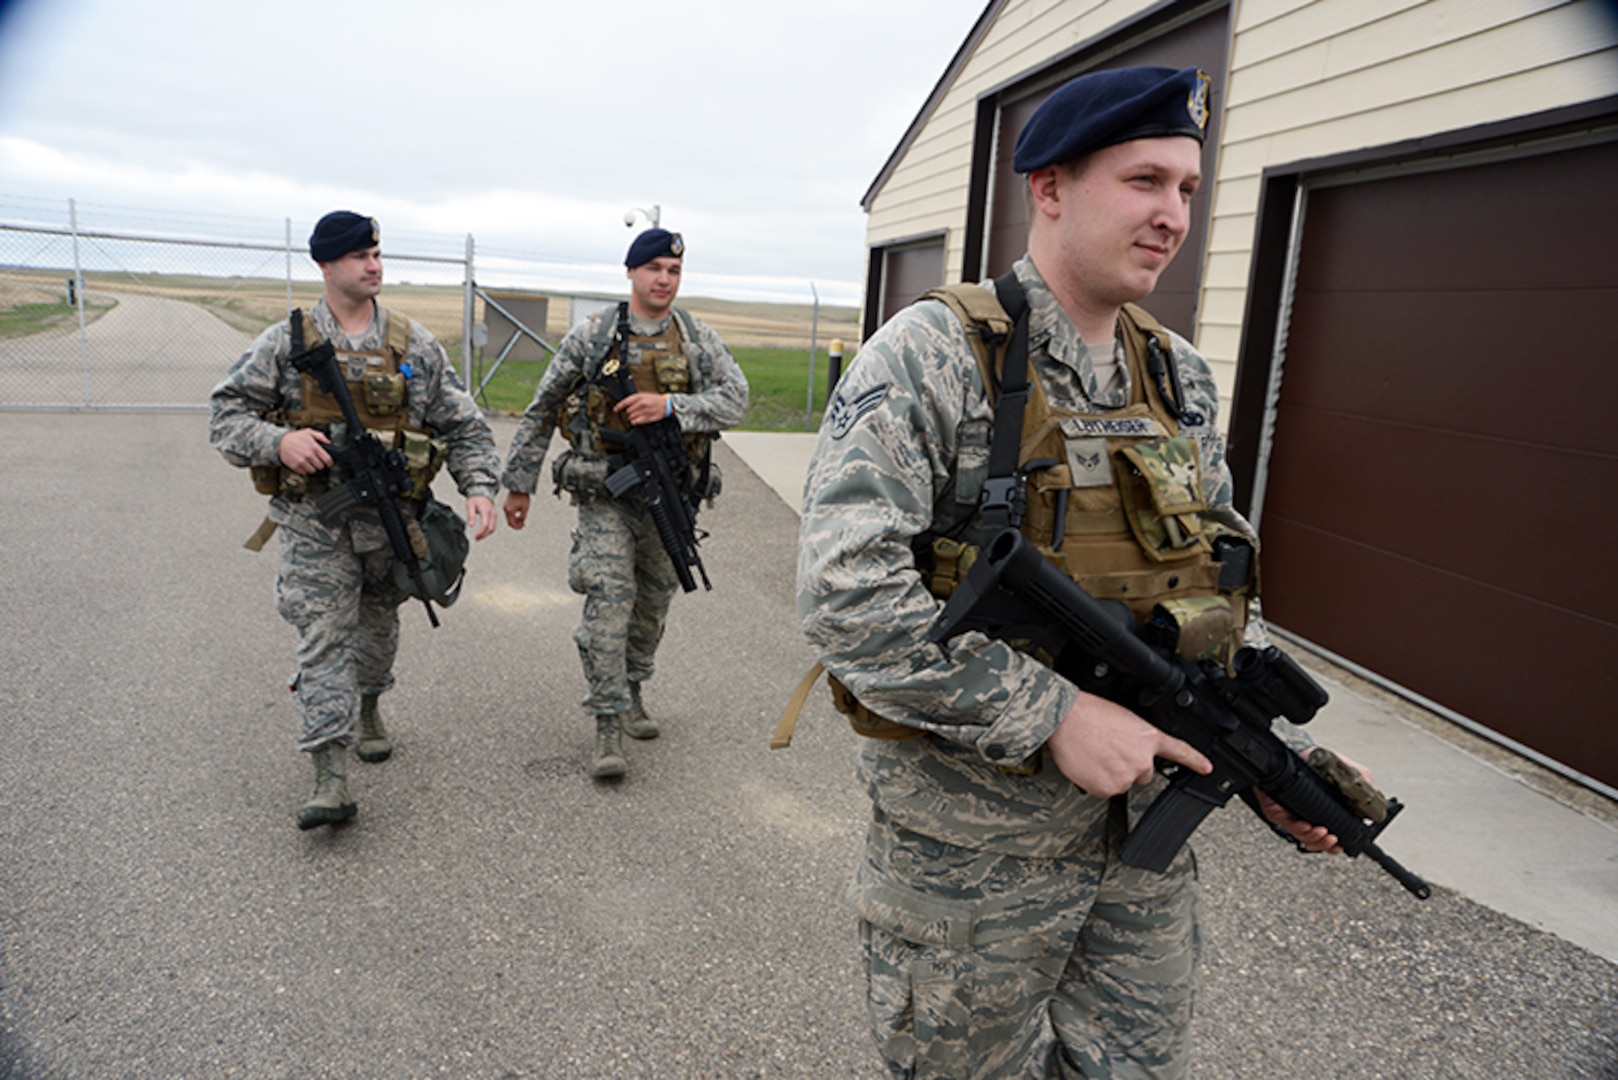 From right to left Senior Airman Scott Leithheiser, Senior Airman Trent Obrien, and Tech. Sgt. Cody Chick, all of the 219th Security Forces Squadron, return from the gate of a Minot Air Force Base, N.D., missile alert facility, after granting access to authorized personnel entering the facility May 20, 2014. 